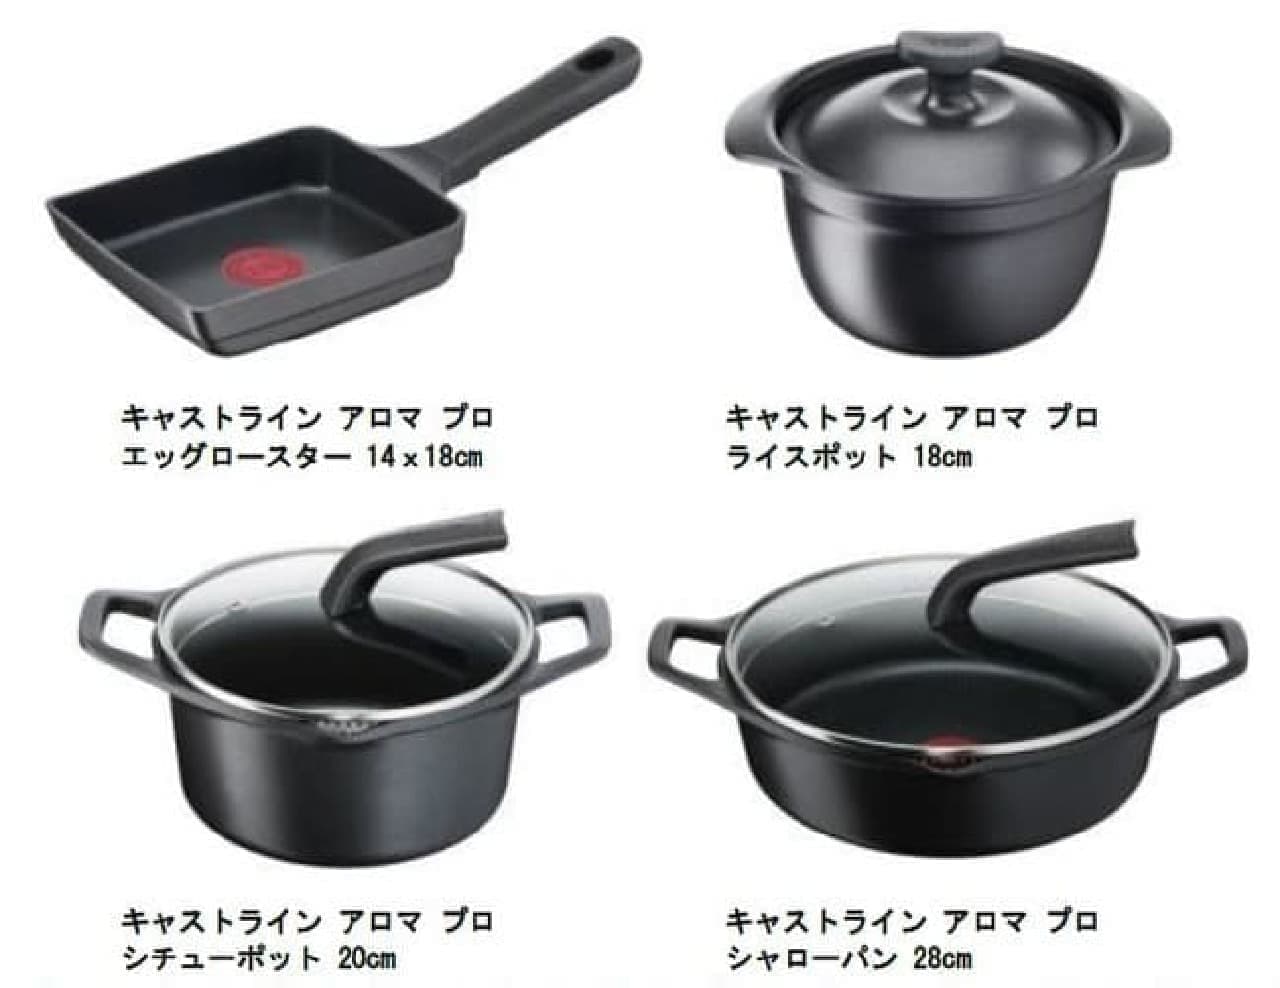 T-FAL "Castline Aroma Pro" egg roaster, stew pot and other products with improved durability